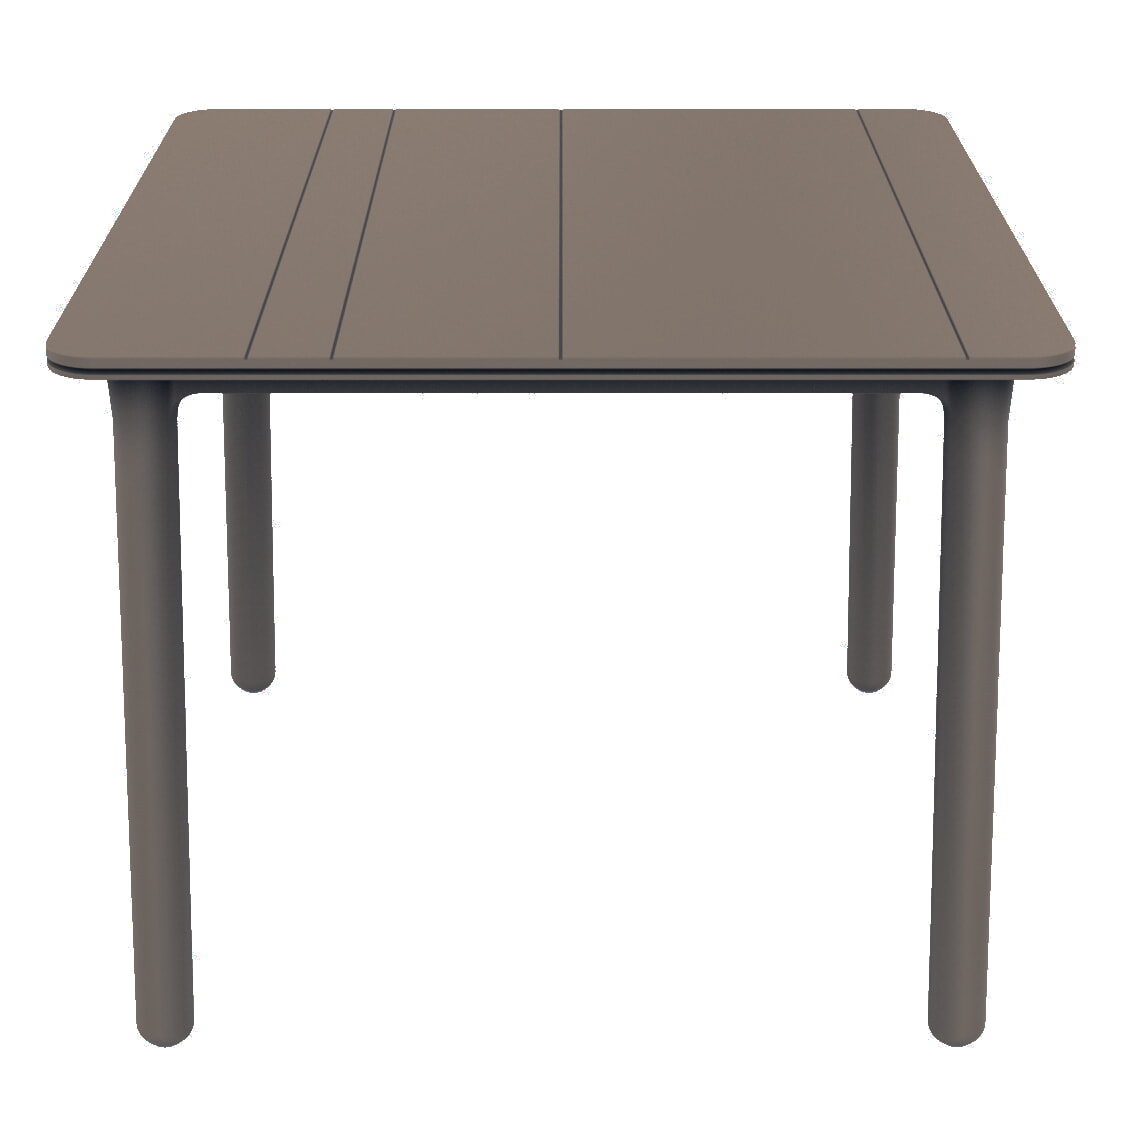 Garbar NOA square table indoors, outdoors 90x90